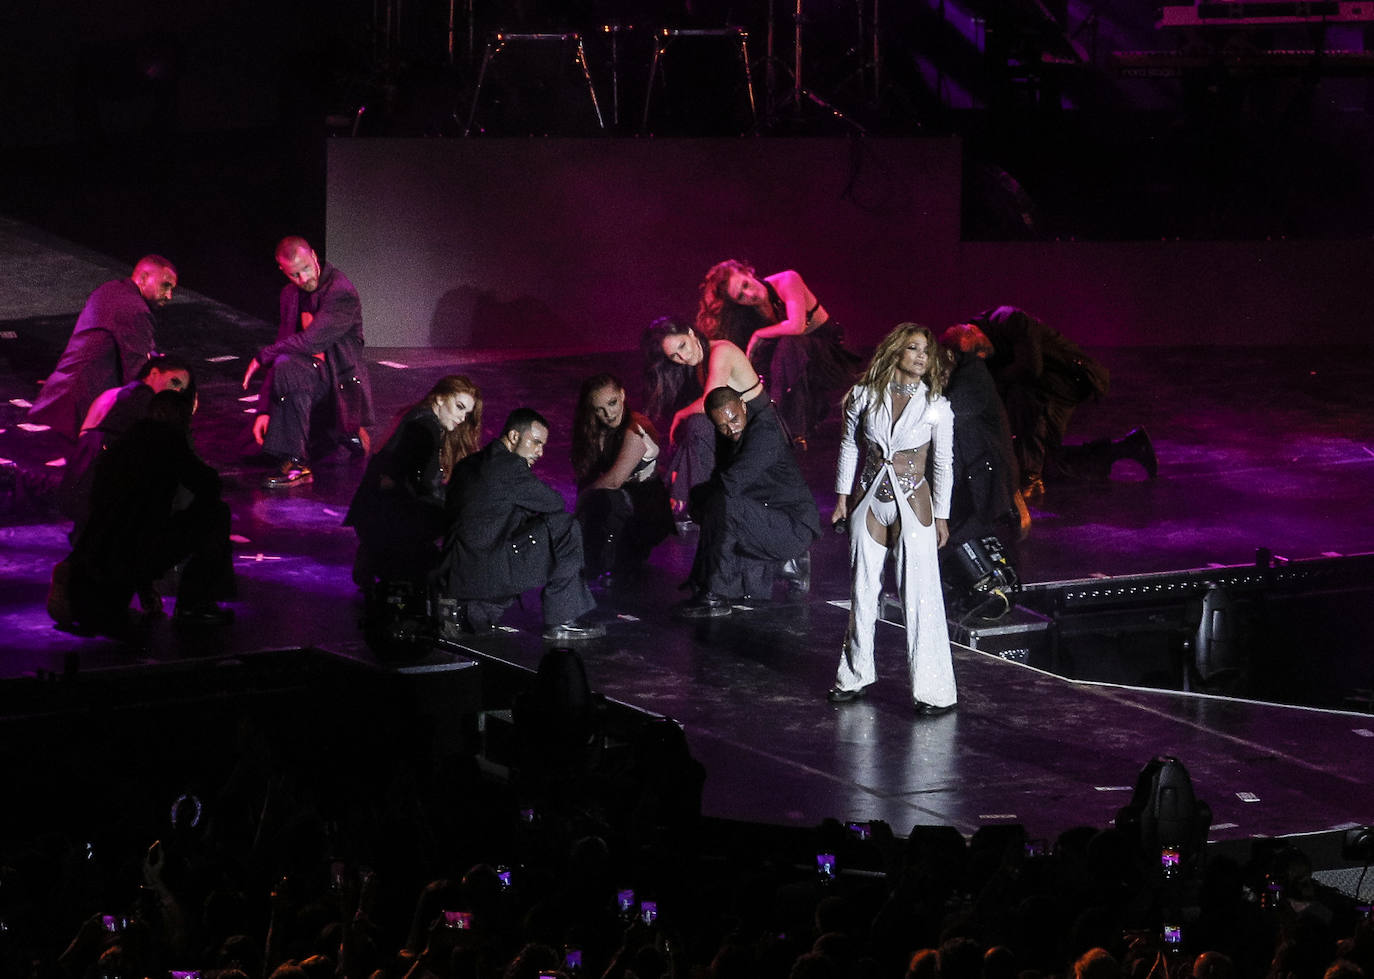 J-Lo exceeds all expectations at Marenostrum